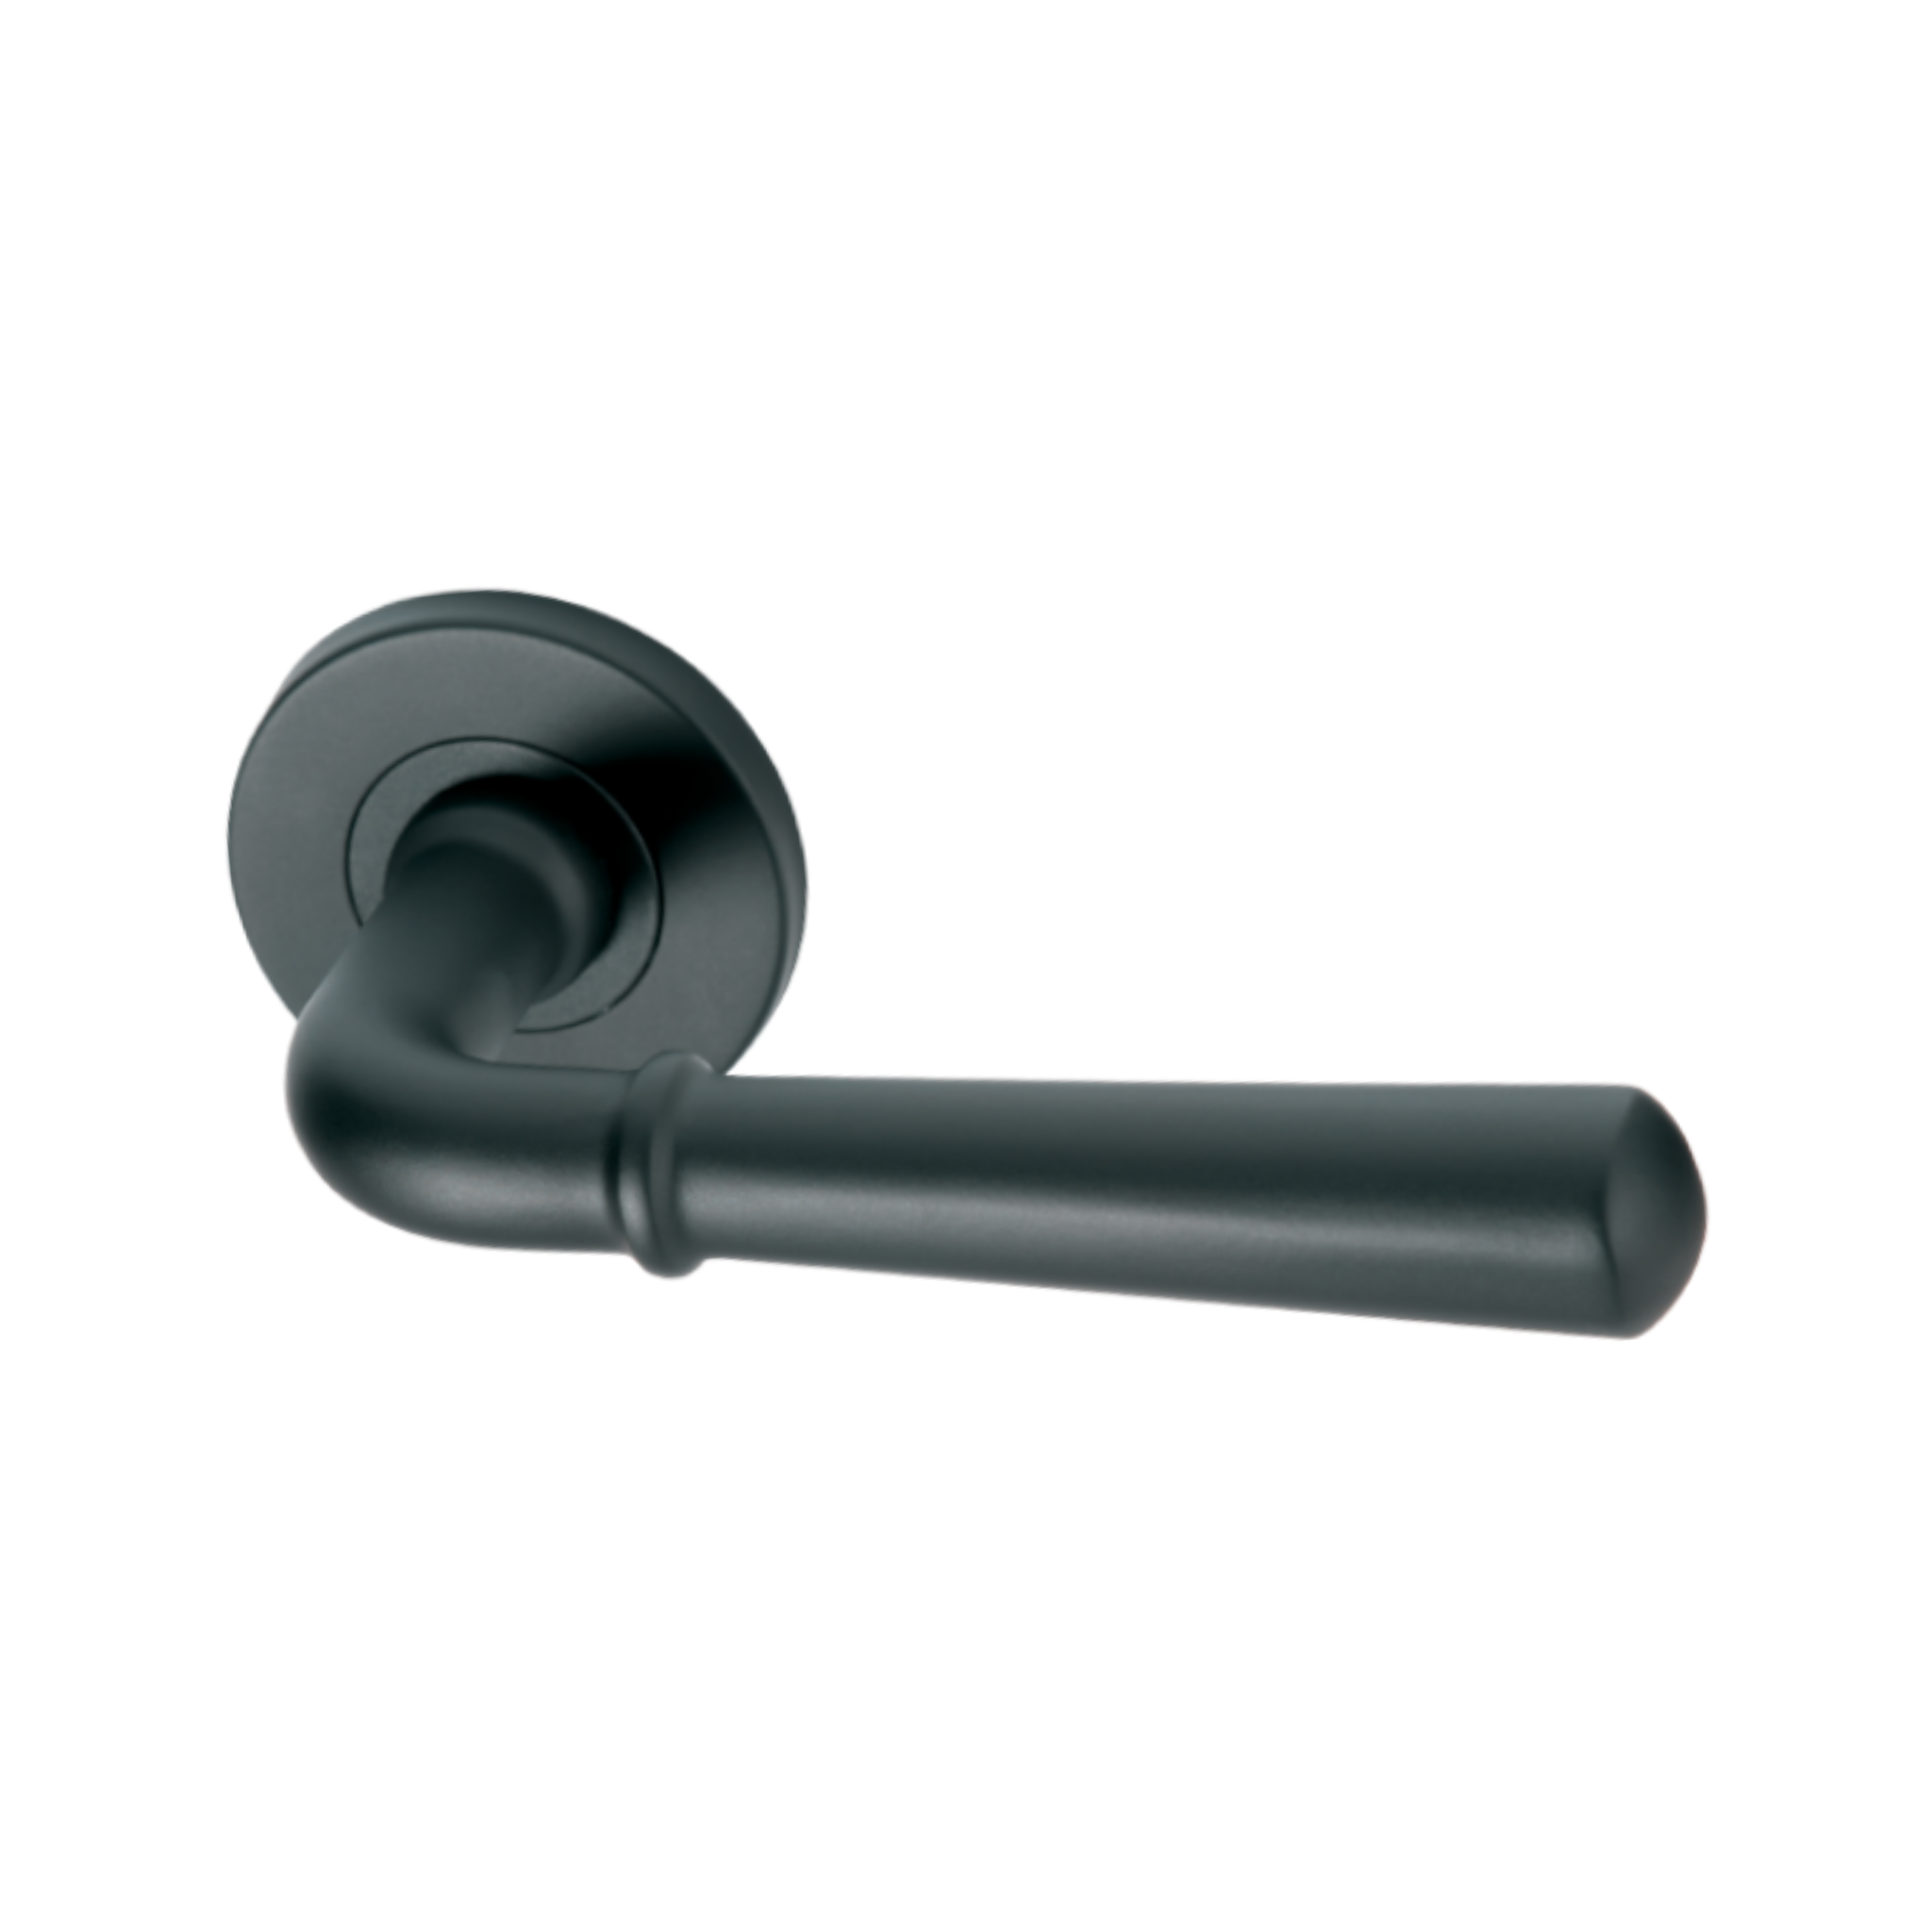 Narvick Black, Lever Handle, Mork Range Solid, On Round Rose, With Escutcheons, Black Stainless Steel, QS